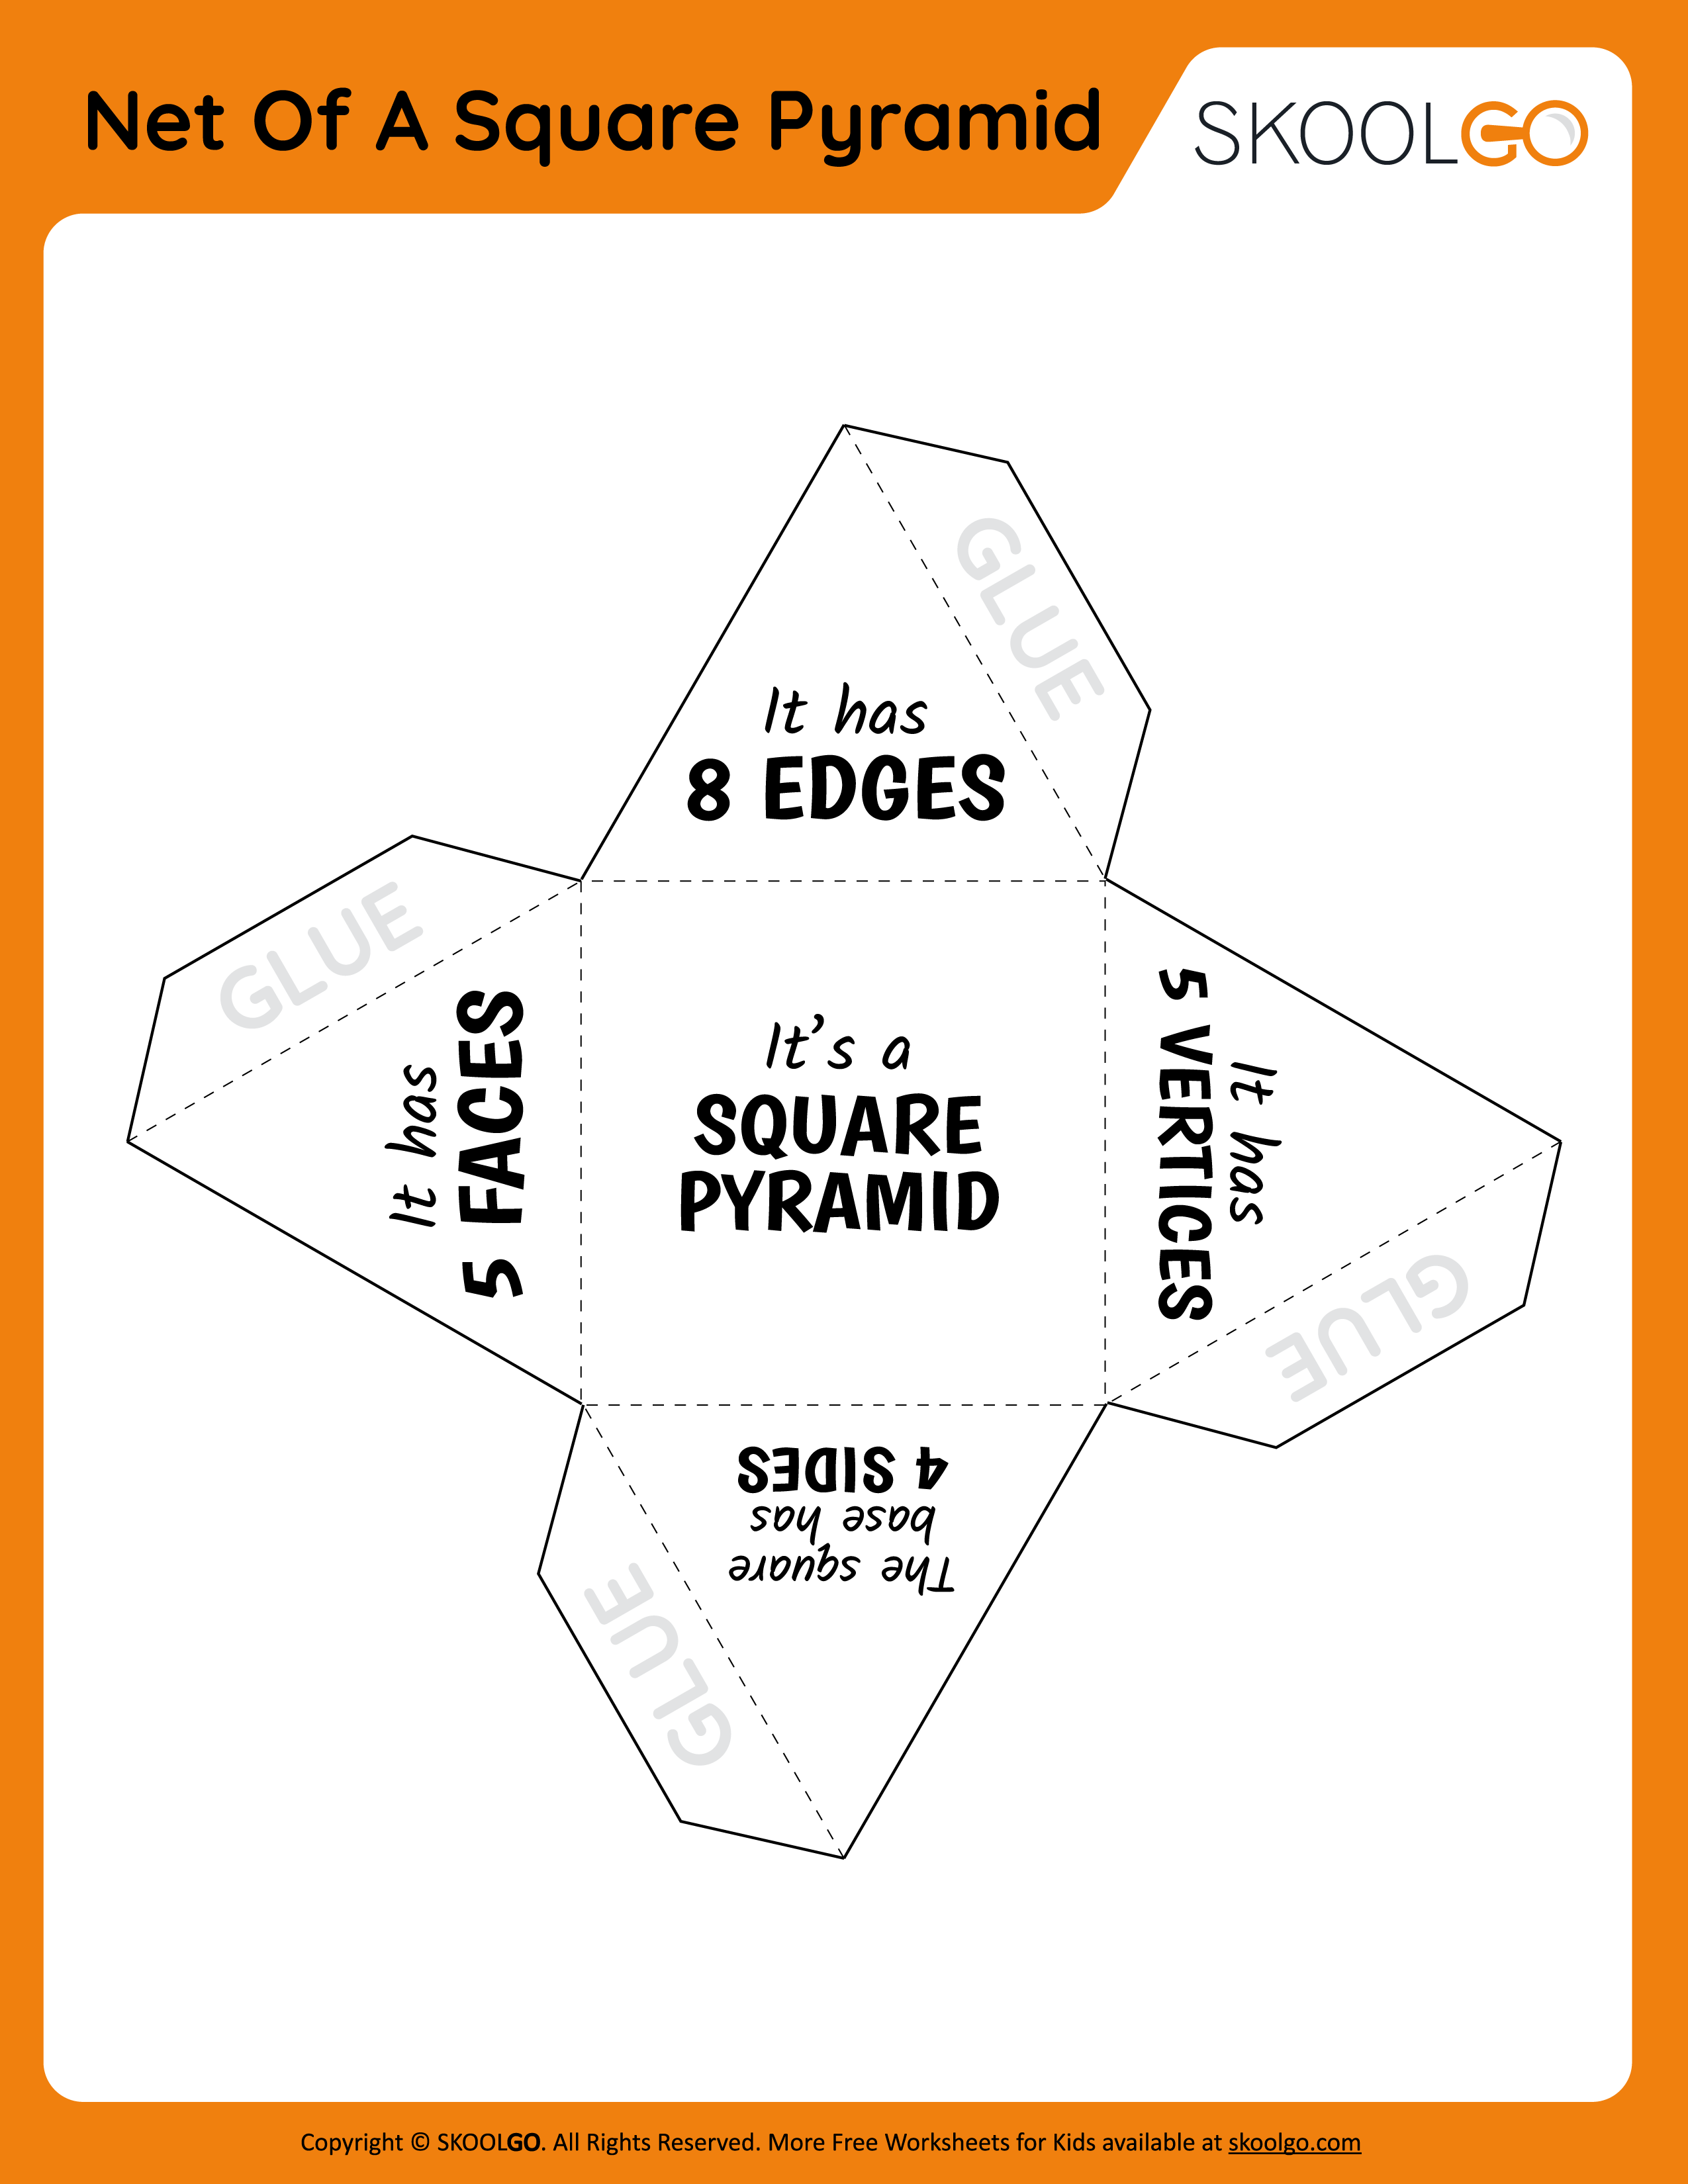 Net Of A Square Pyramid - Free Worksheet for Kids